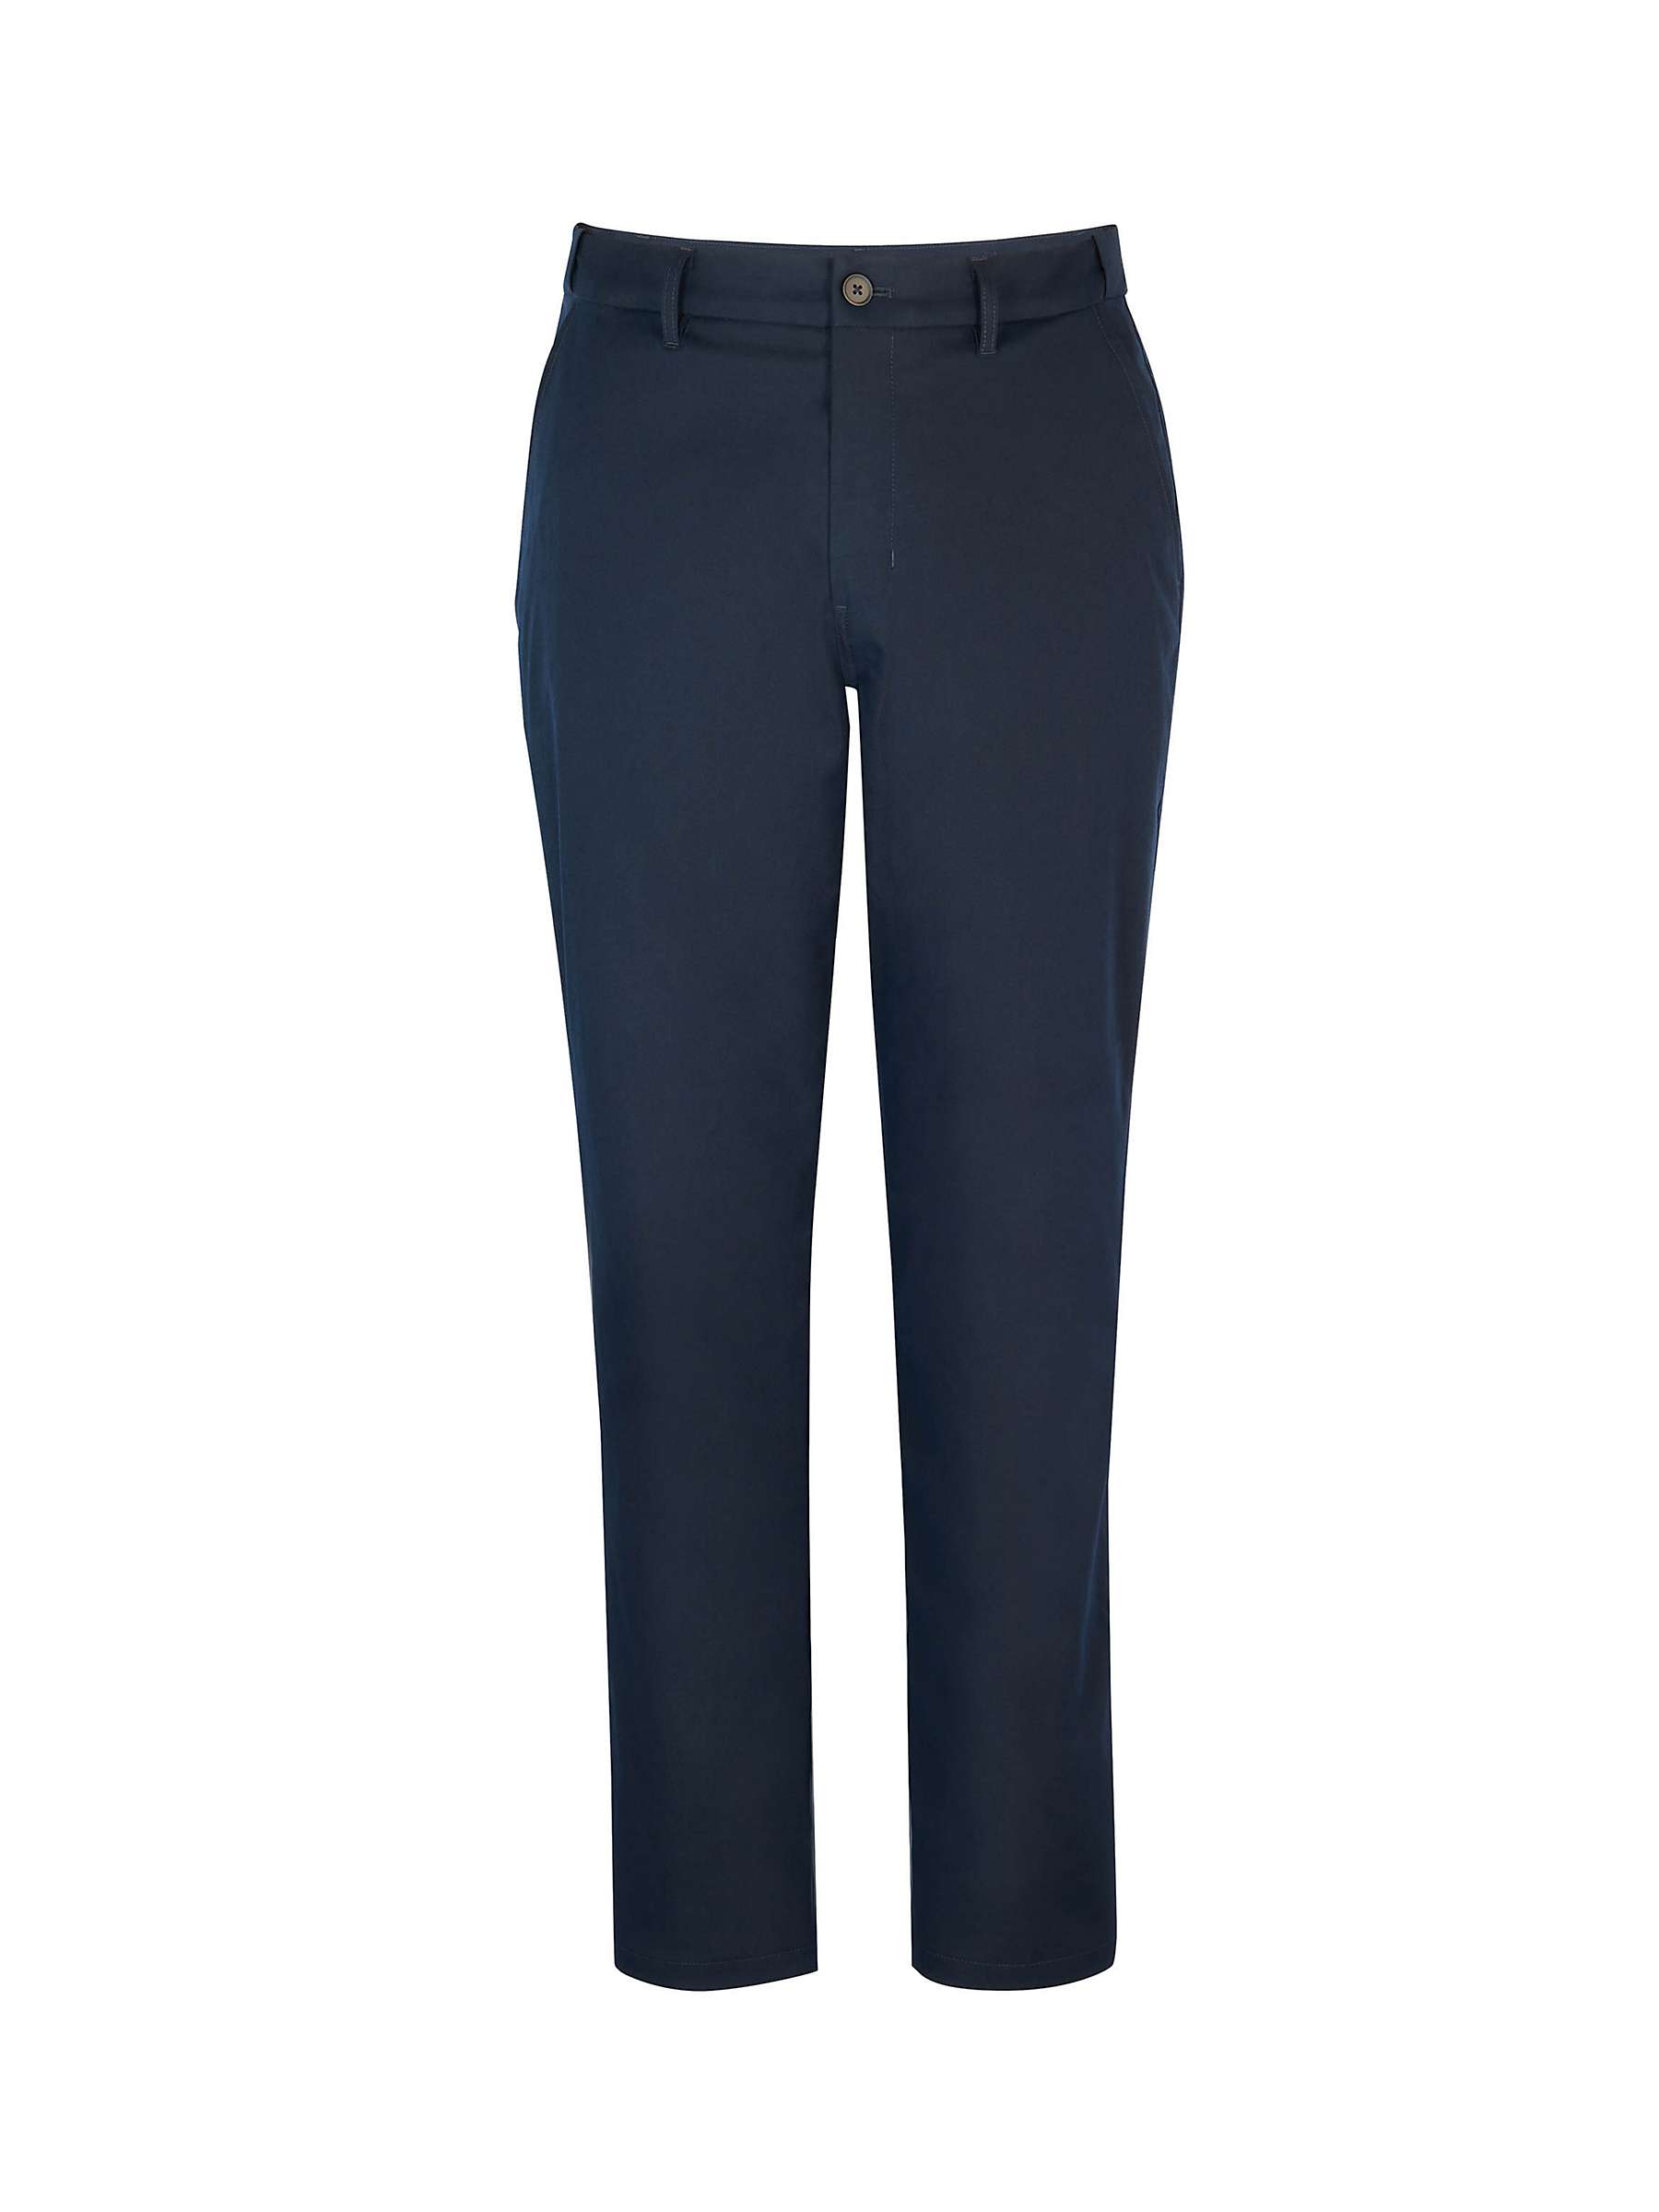 Buy Rohan Dry District Waterproof Chinos Trousers Online at johnlewis.com